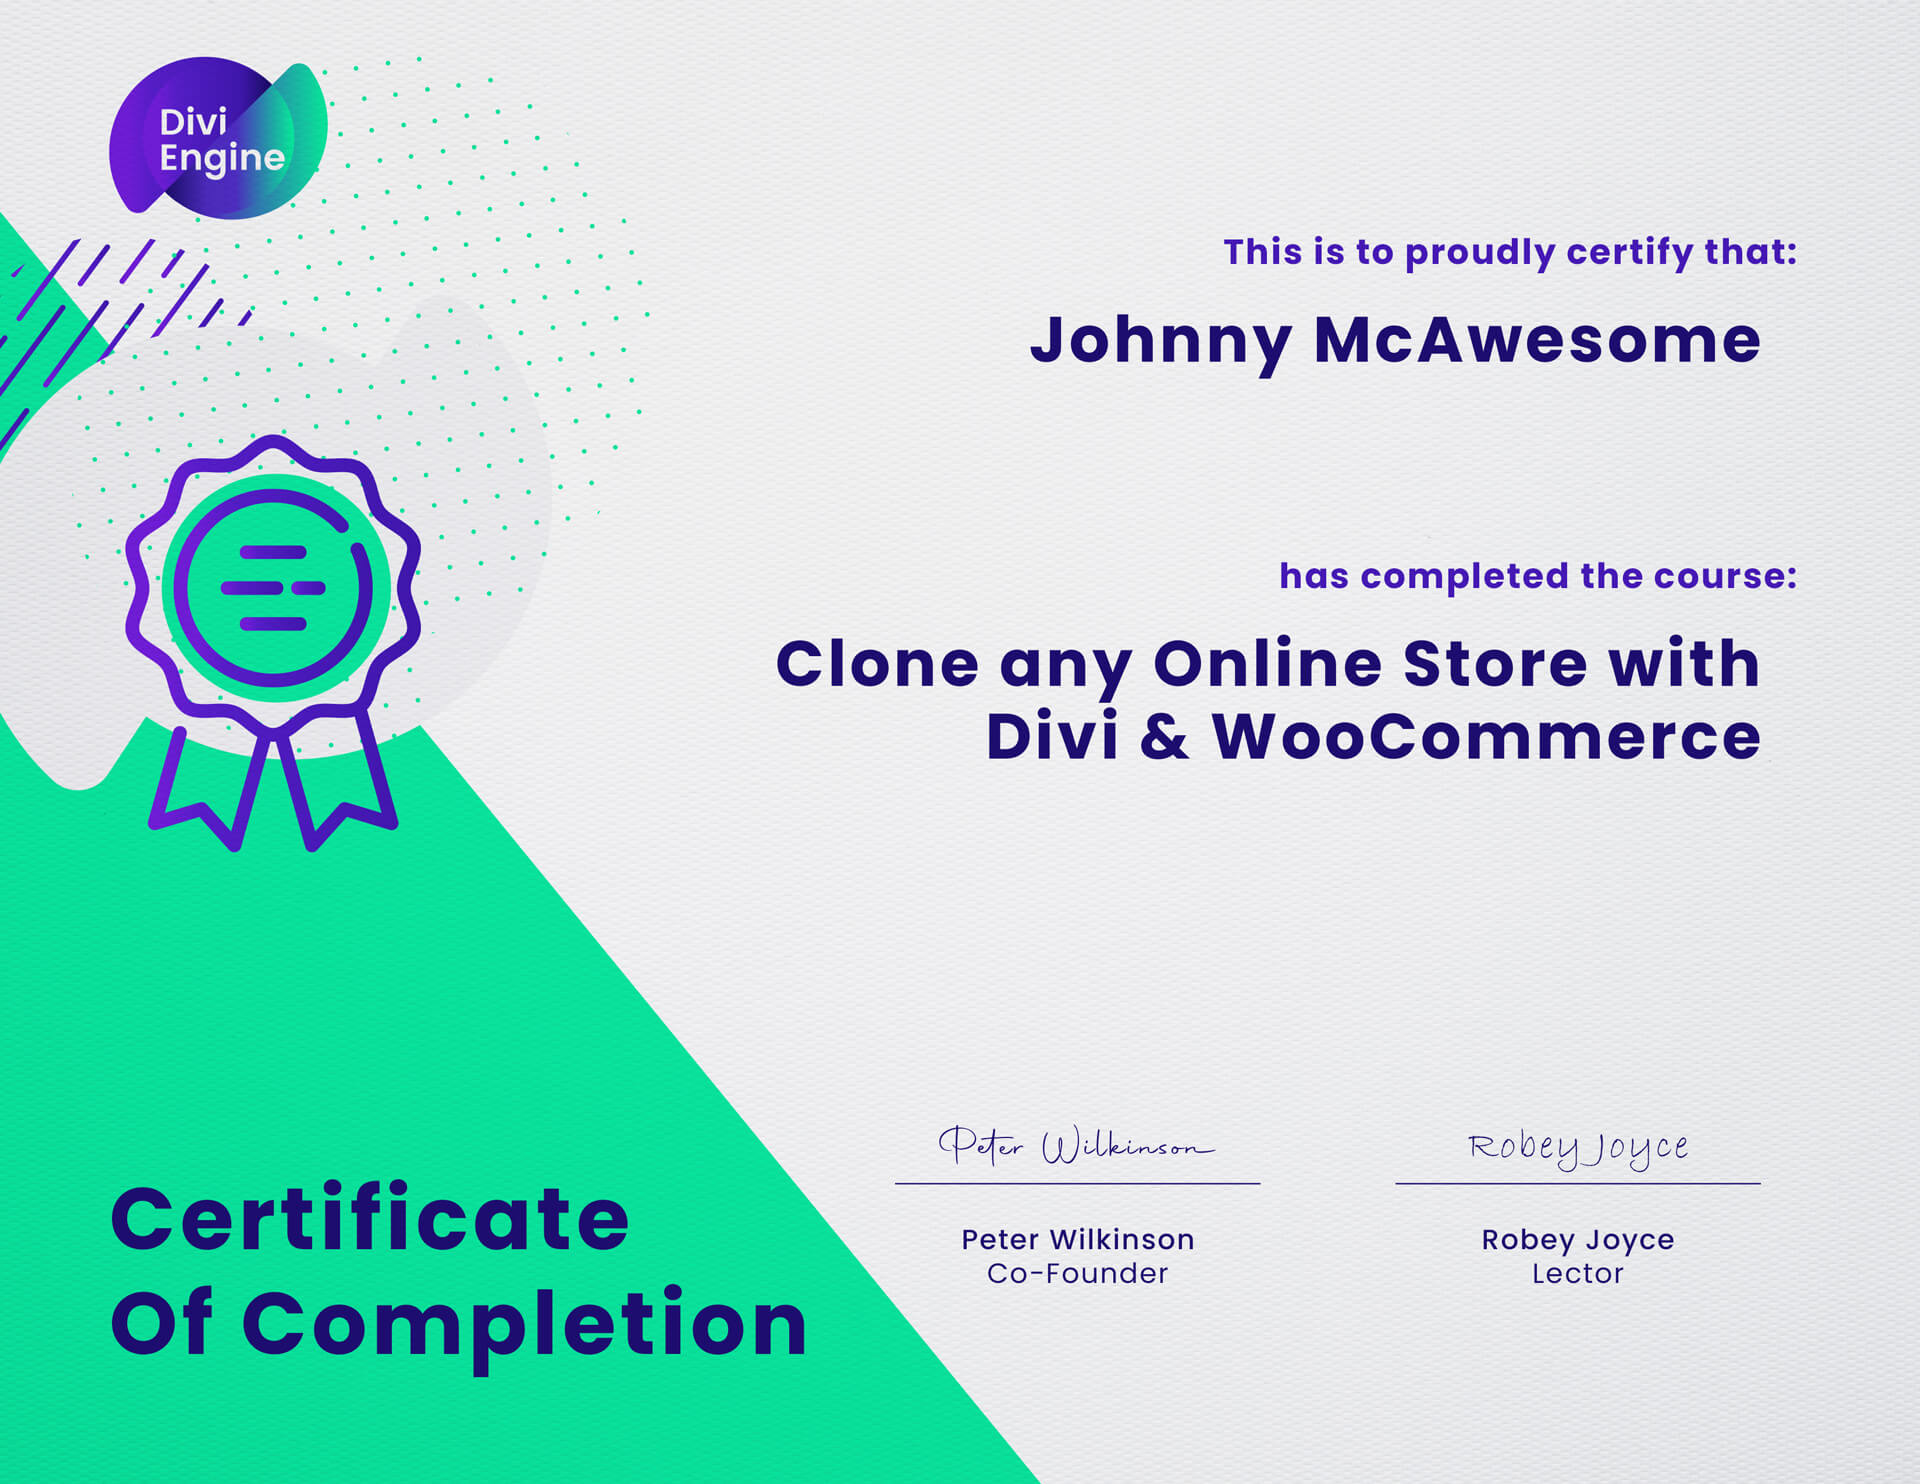 Clone any Online Store with Divi and WooCommerce certificate